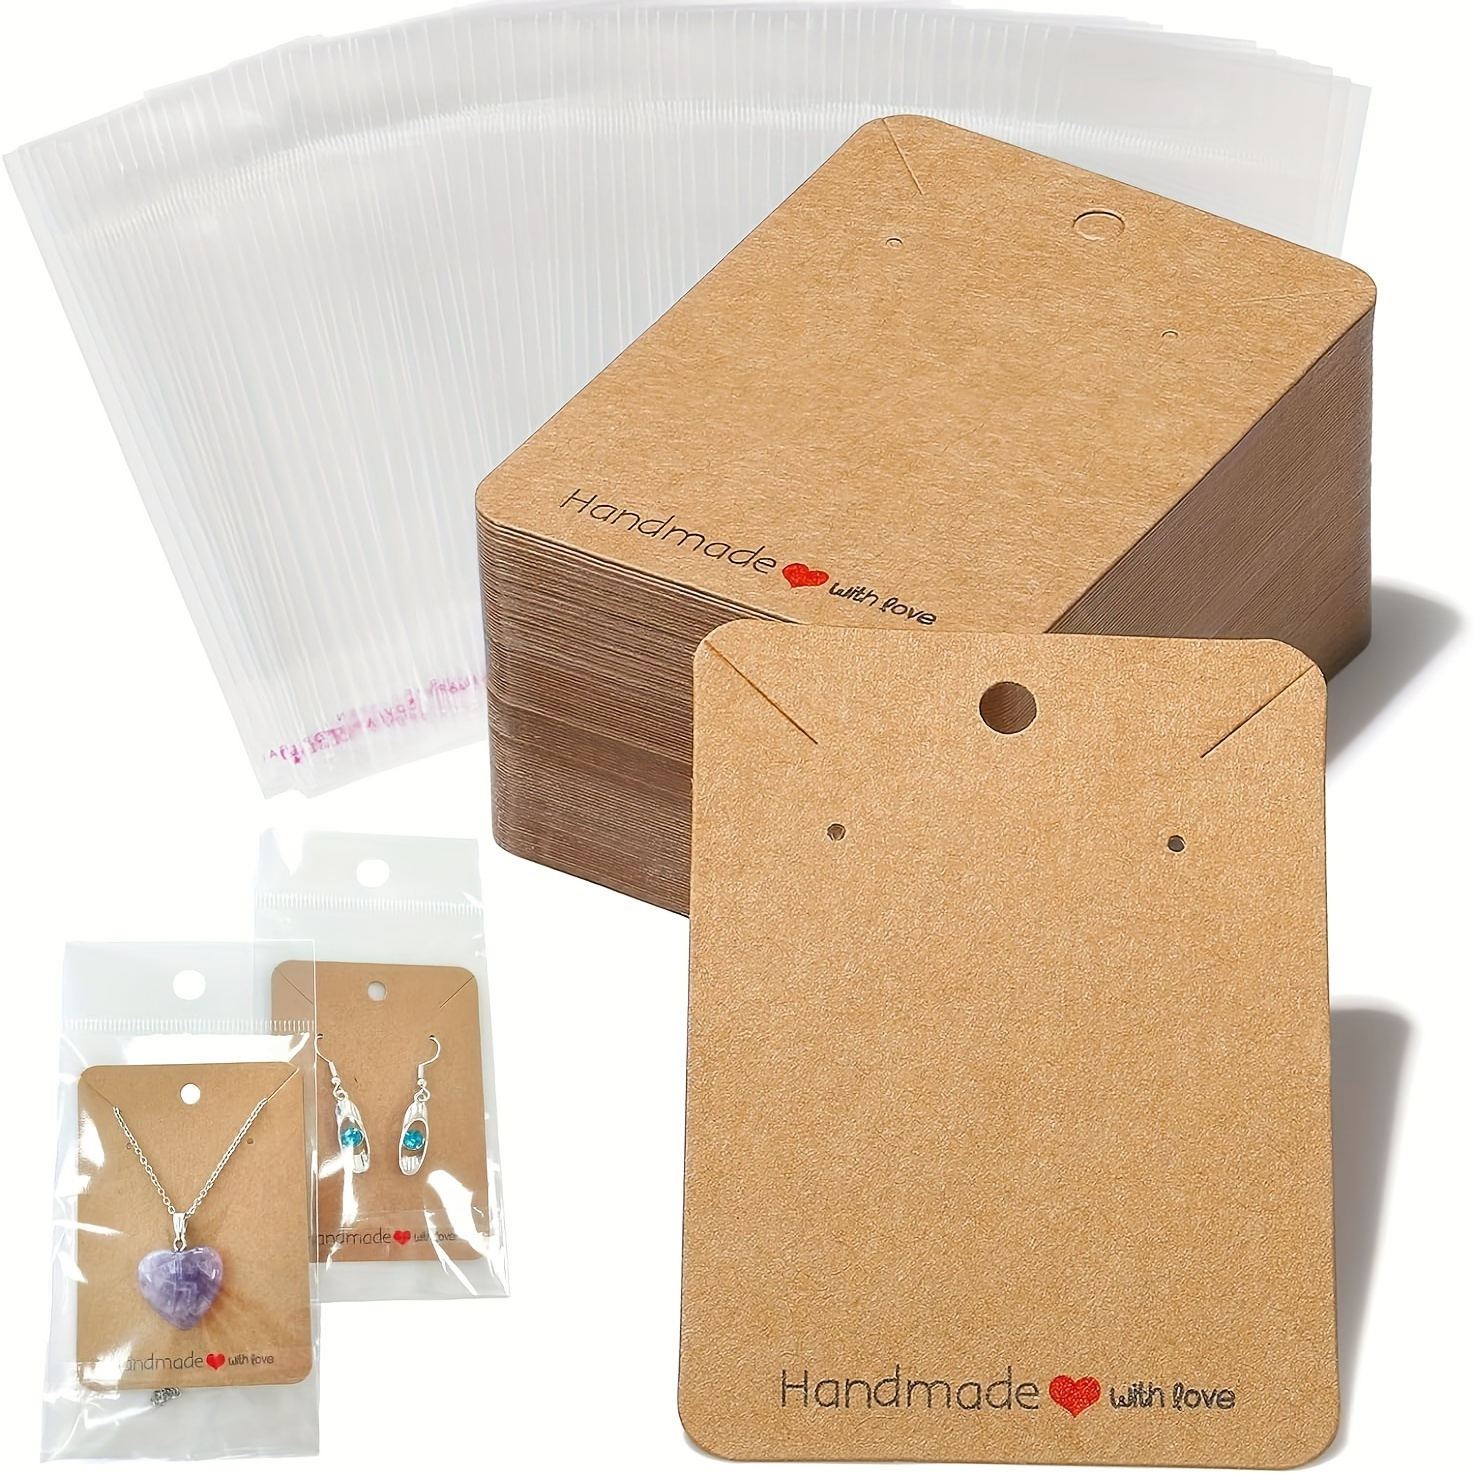 

100pcs Necklace Display Paper Cards With Clear Self-adhesive Bags, Jewelry Hanging Card Holders, Convenient For Diy Earrings, Ear Studs, Accessory Packaging, Perfect